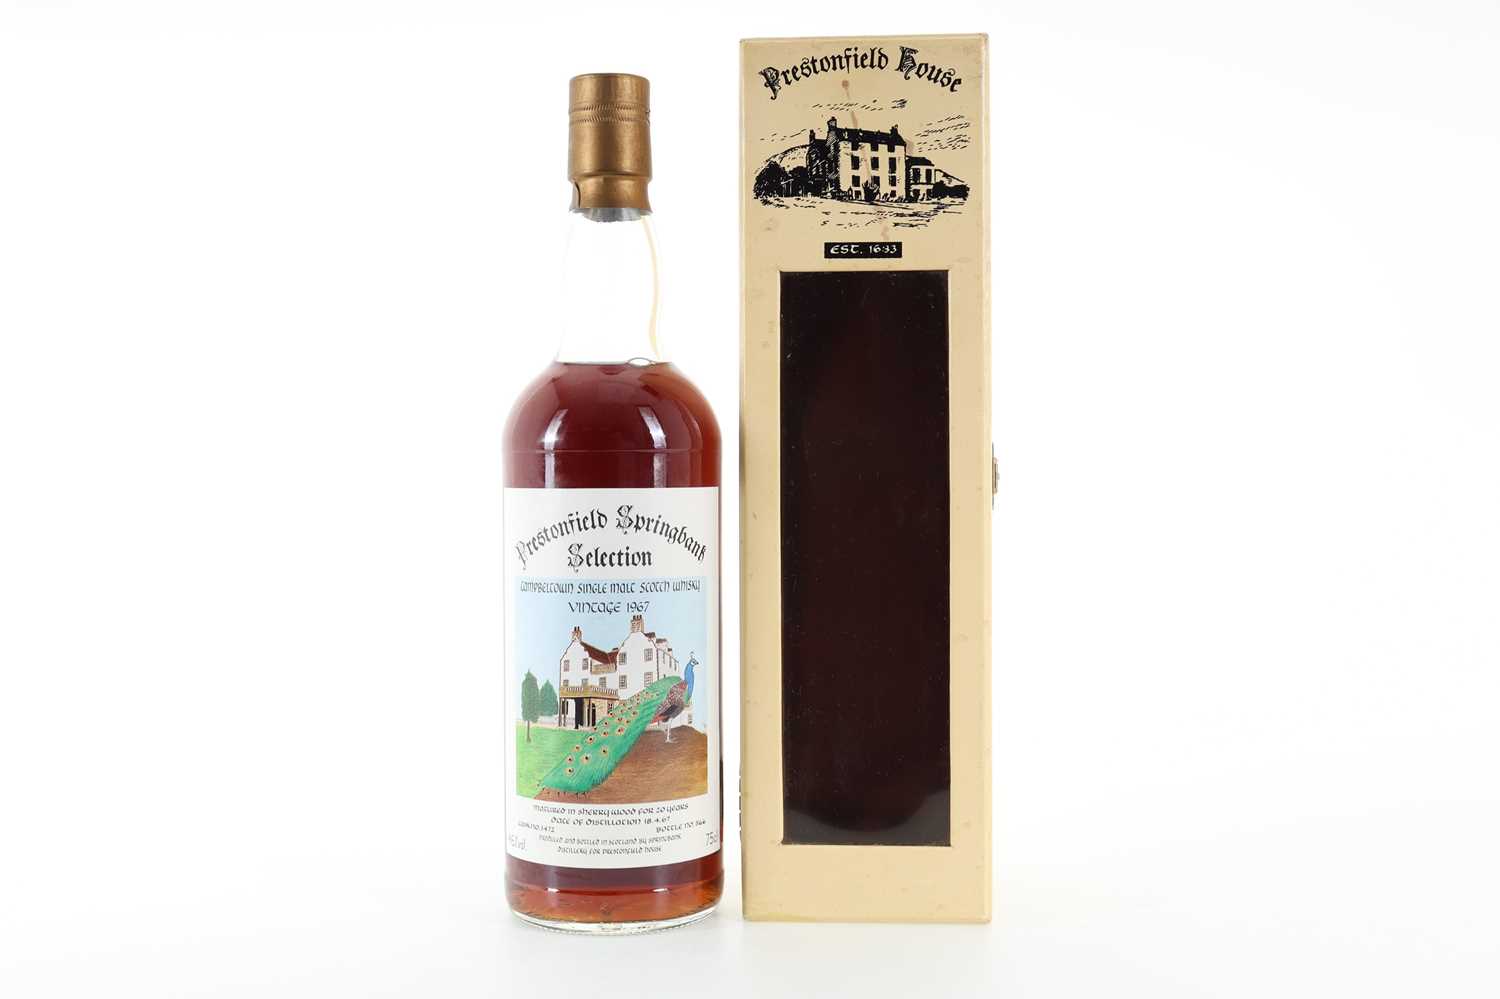 Lot 104 - SPRINGBANK 1972 20 YEAR OLD PRESTONFIELD HOUSE 75CL